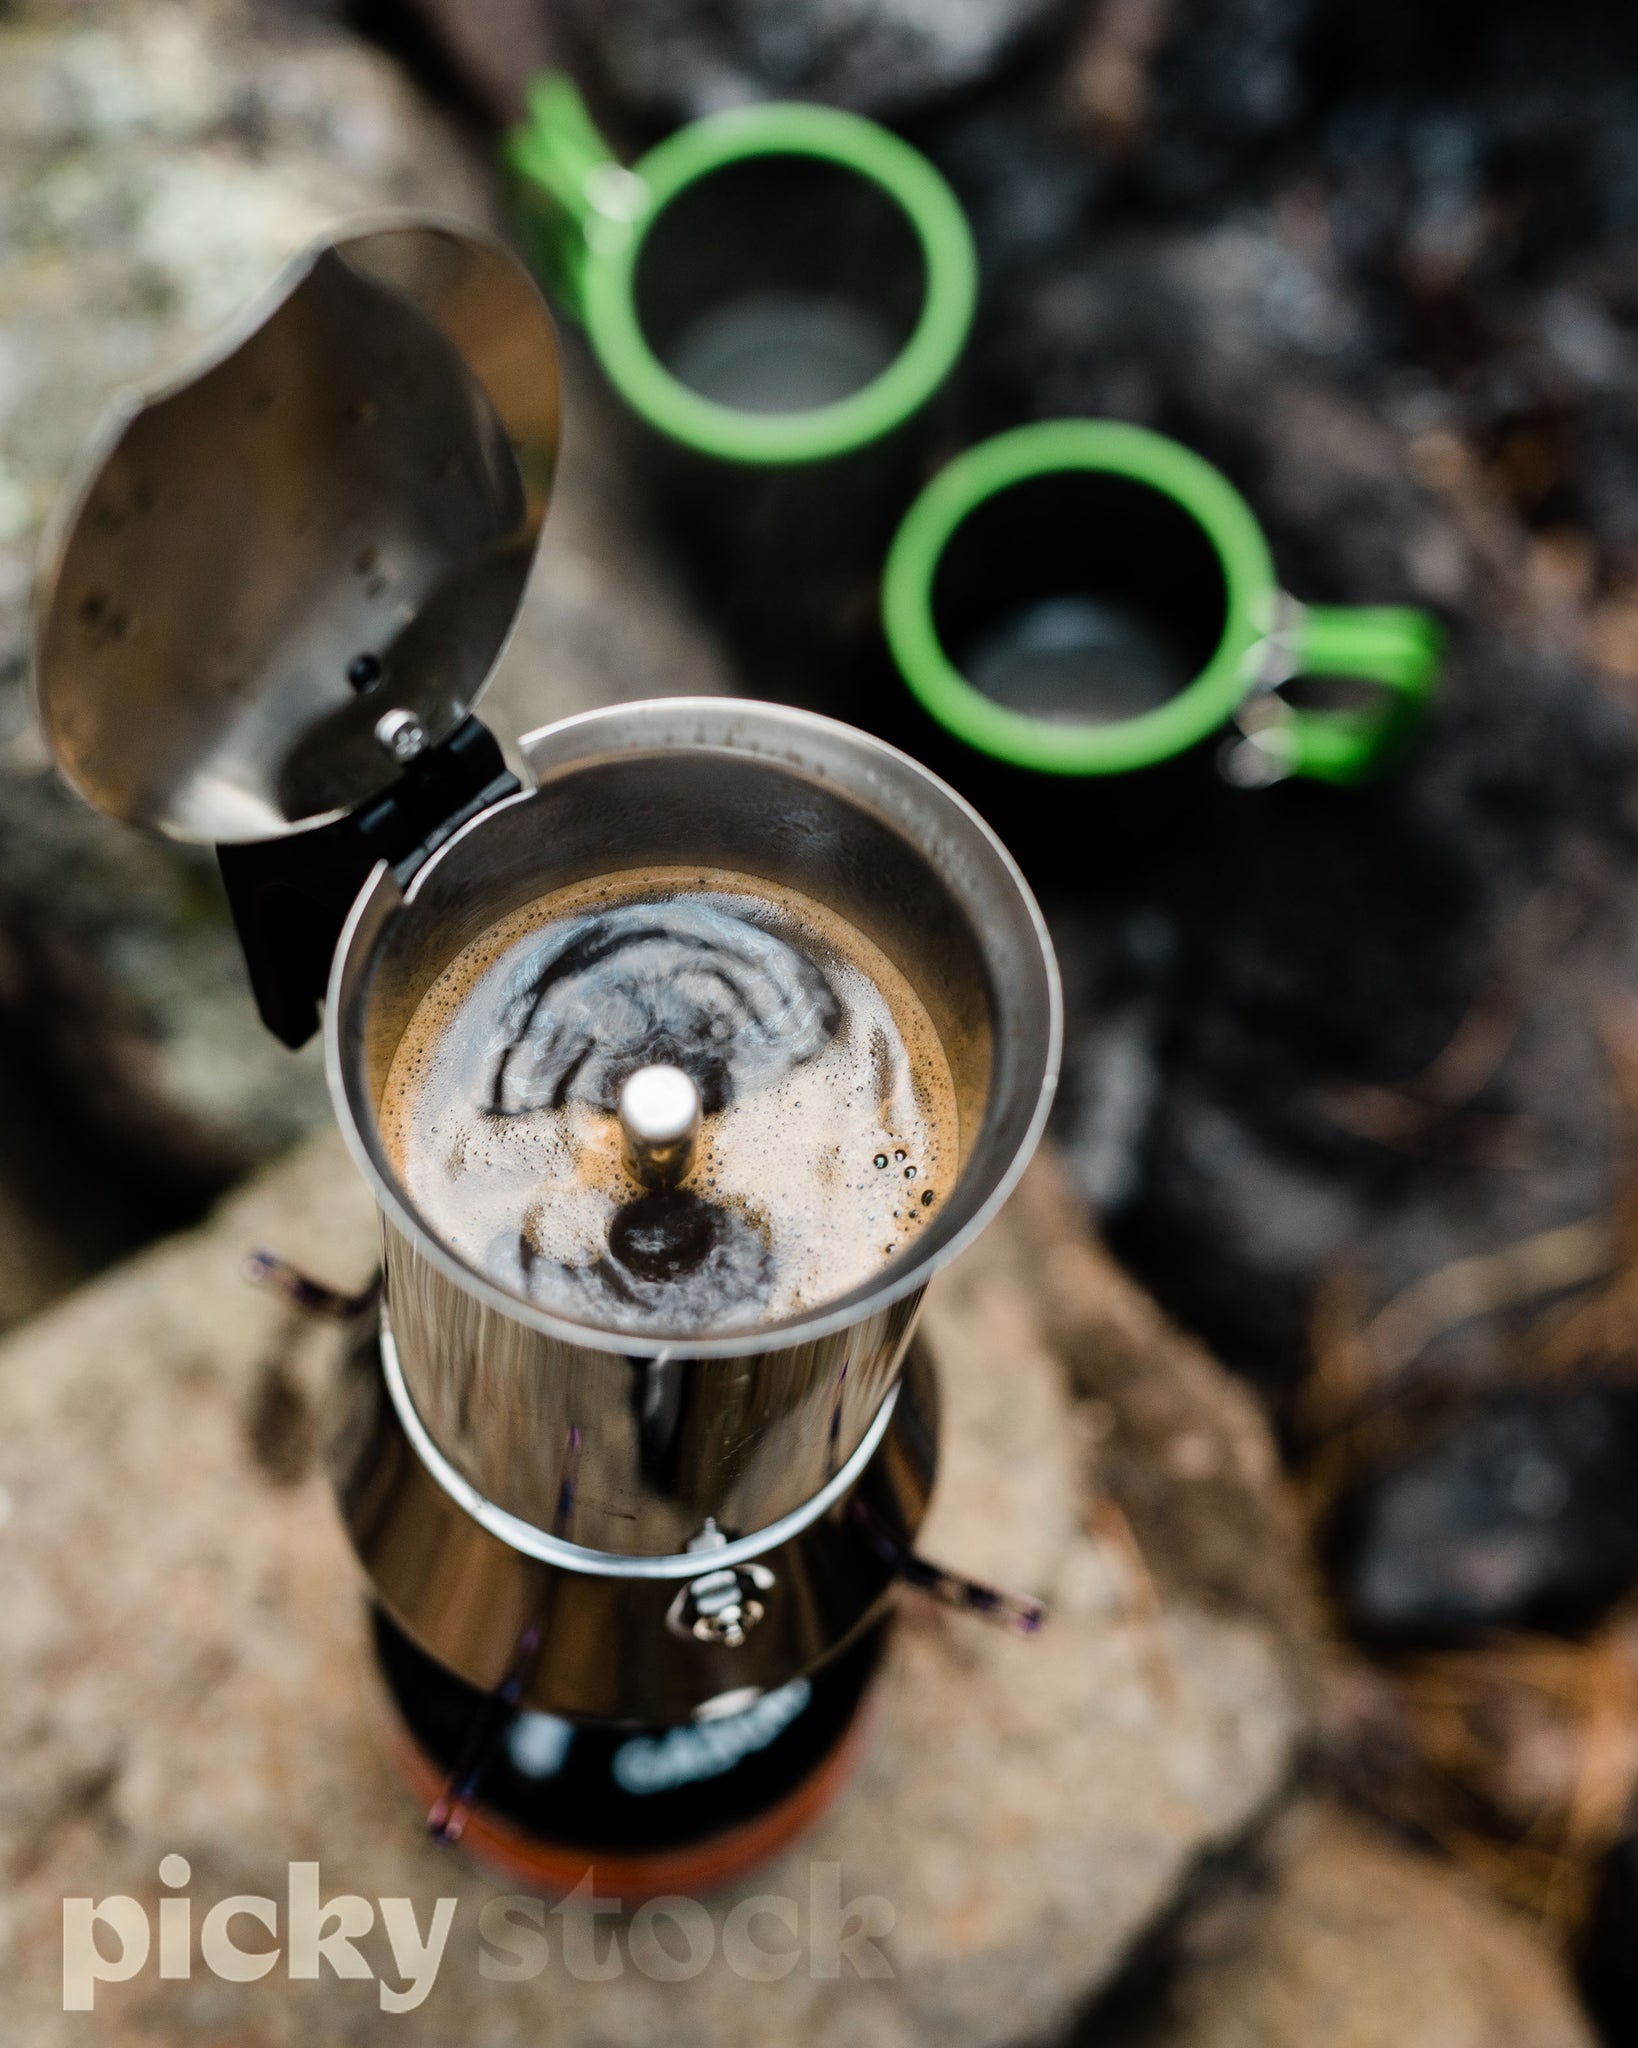 Close up image of coffee maker sitting on a rock. Two empty green and grey mugs in the background ready to be filled. Coffee maker is stainless steel, the burner is black with an orange base